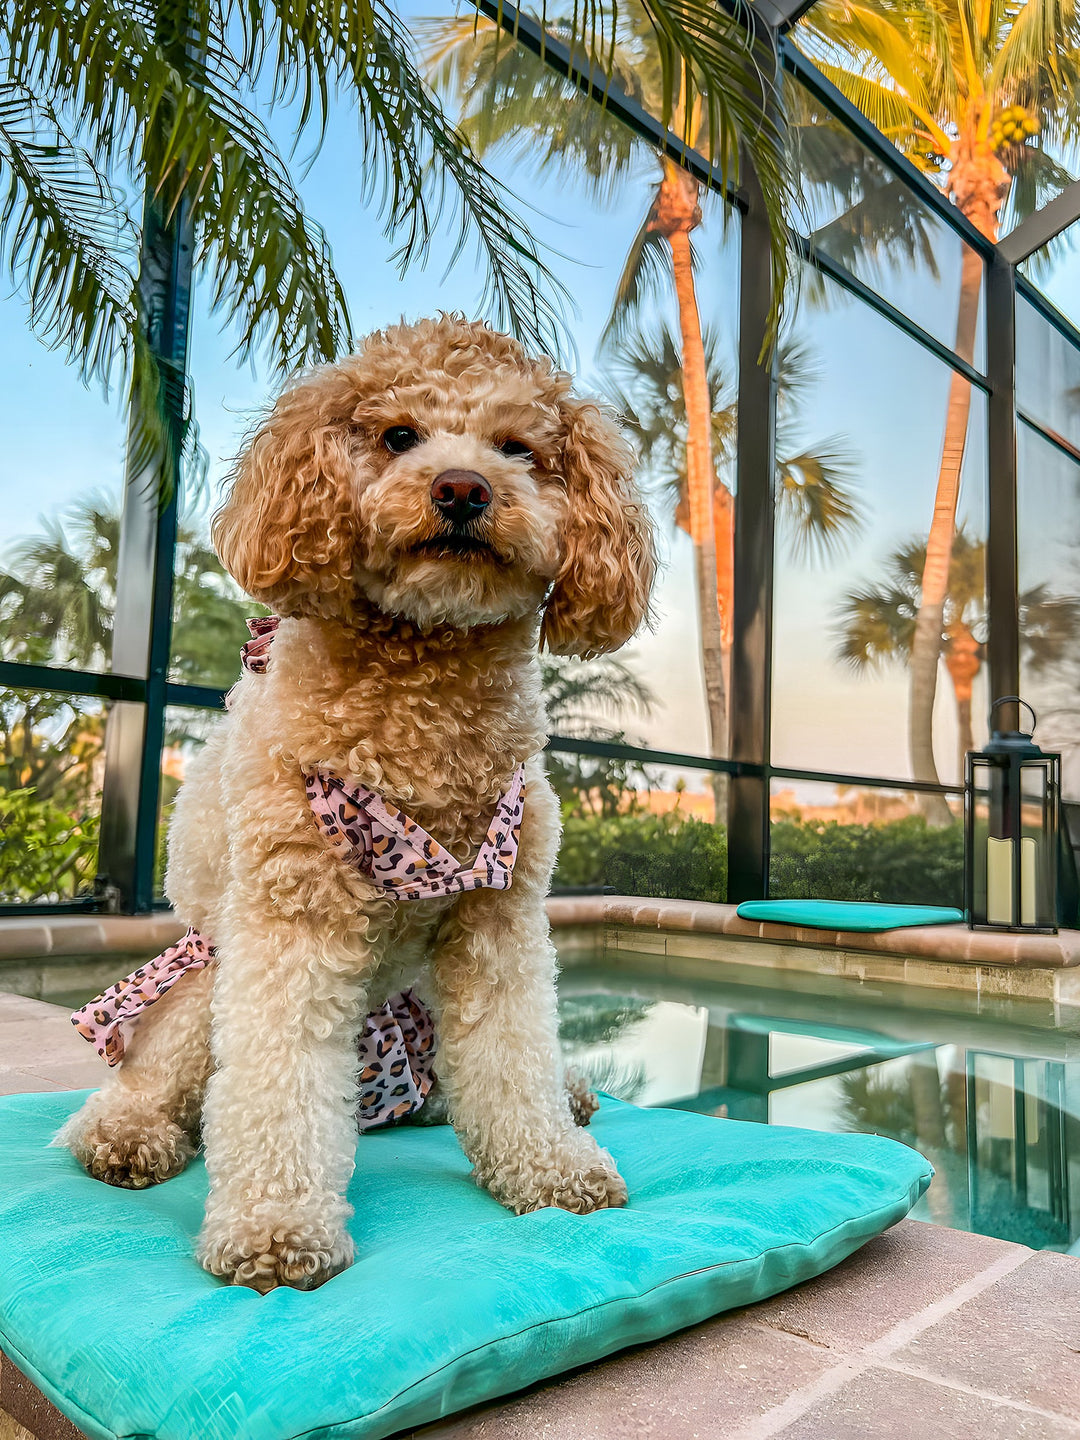 Summer Care 101: How to Keep Dogs Cool in the Summer Heat